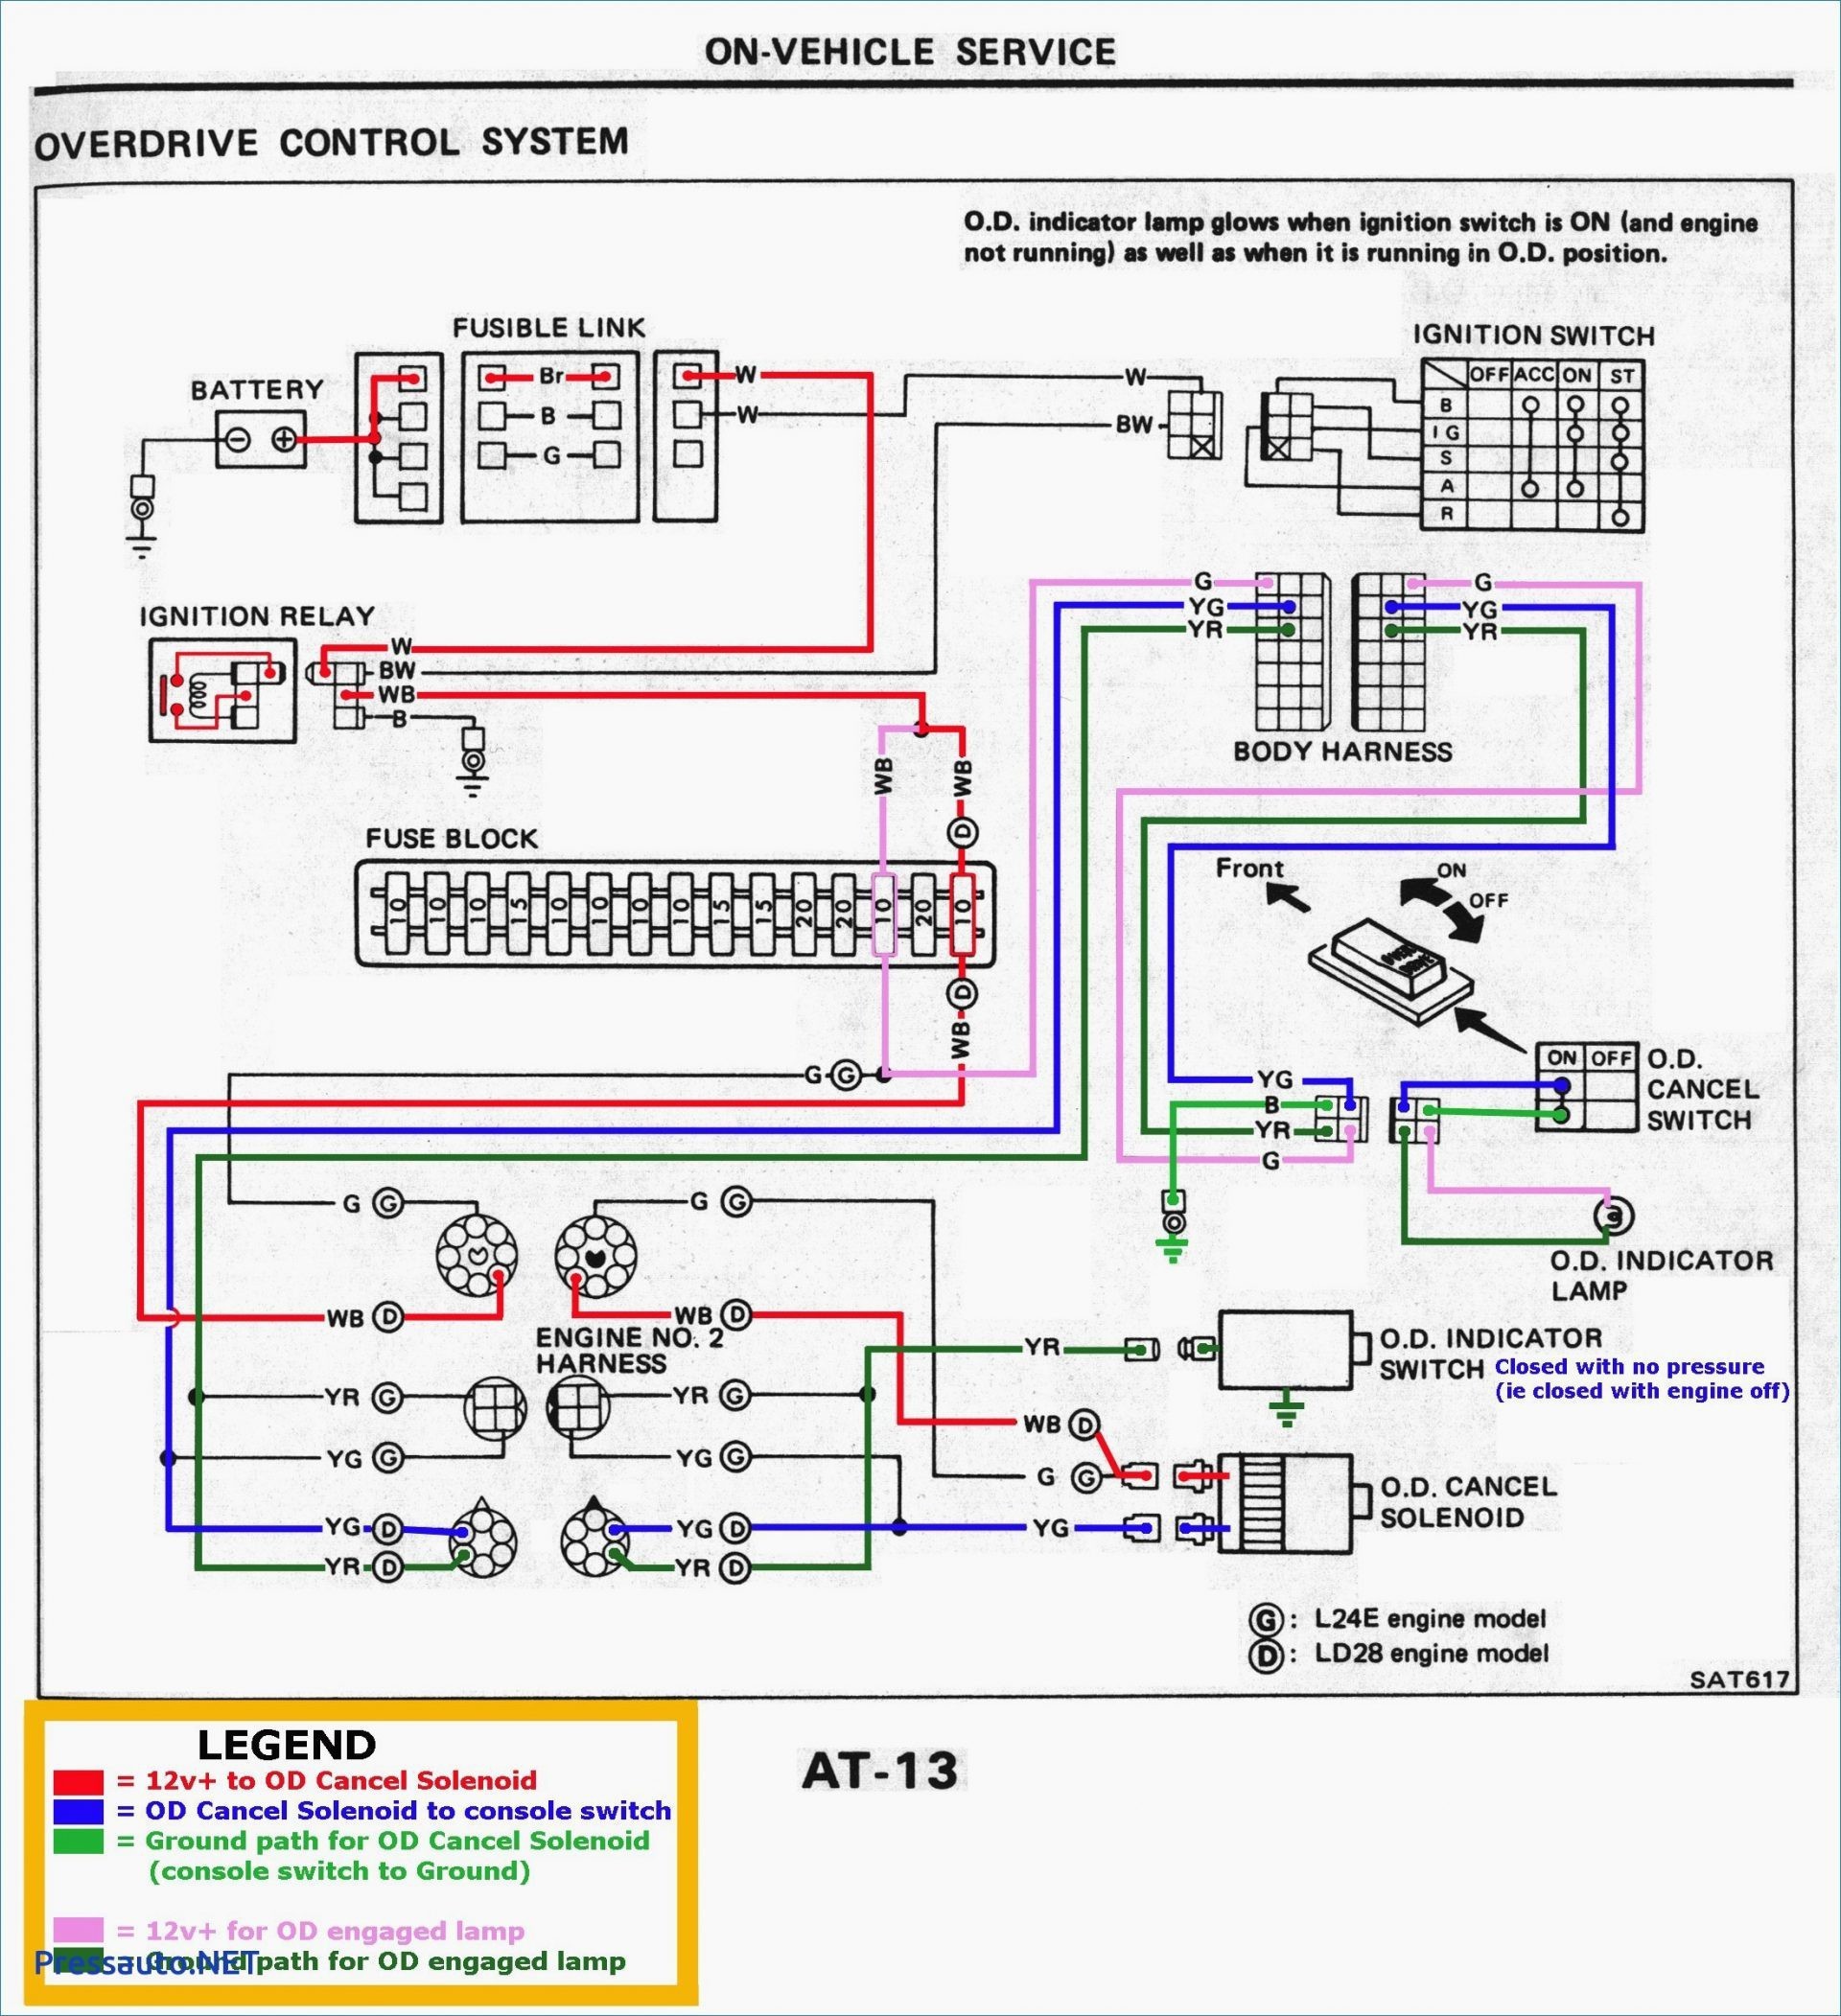 2003 toyota Corolla Engine Diagram 2002 Prius Engine Diagram Another Blog About Wiring Diagram • Of 2003 toyota Corolla Engine Diagram